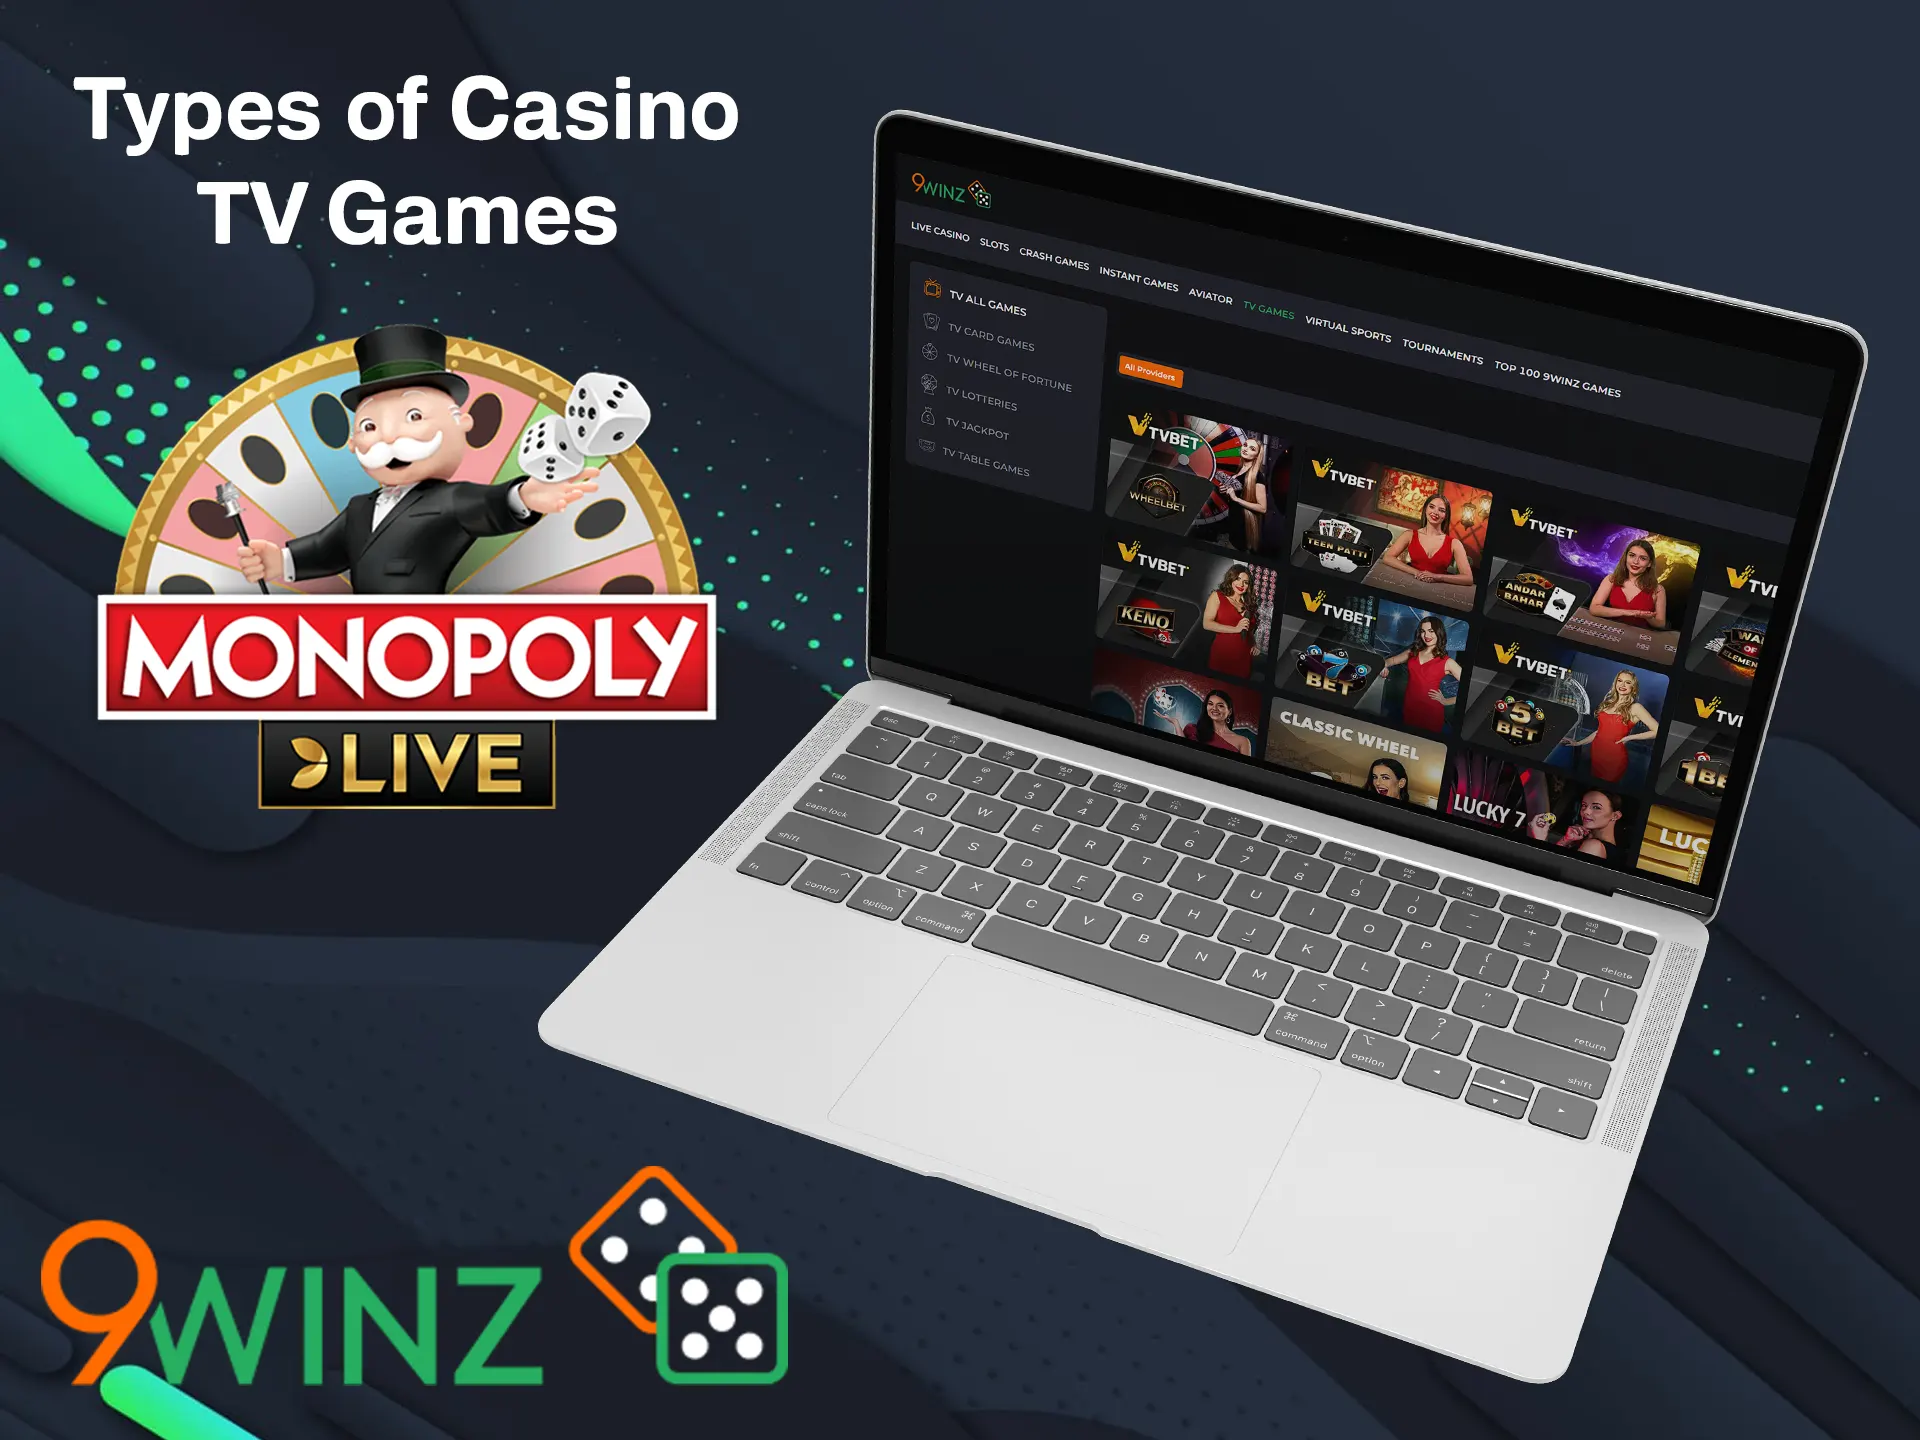 Choose preferred TV game type and play it at the 9winz casino.